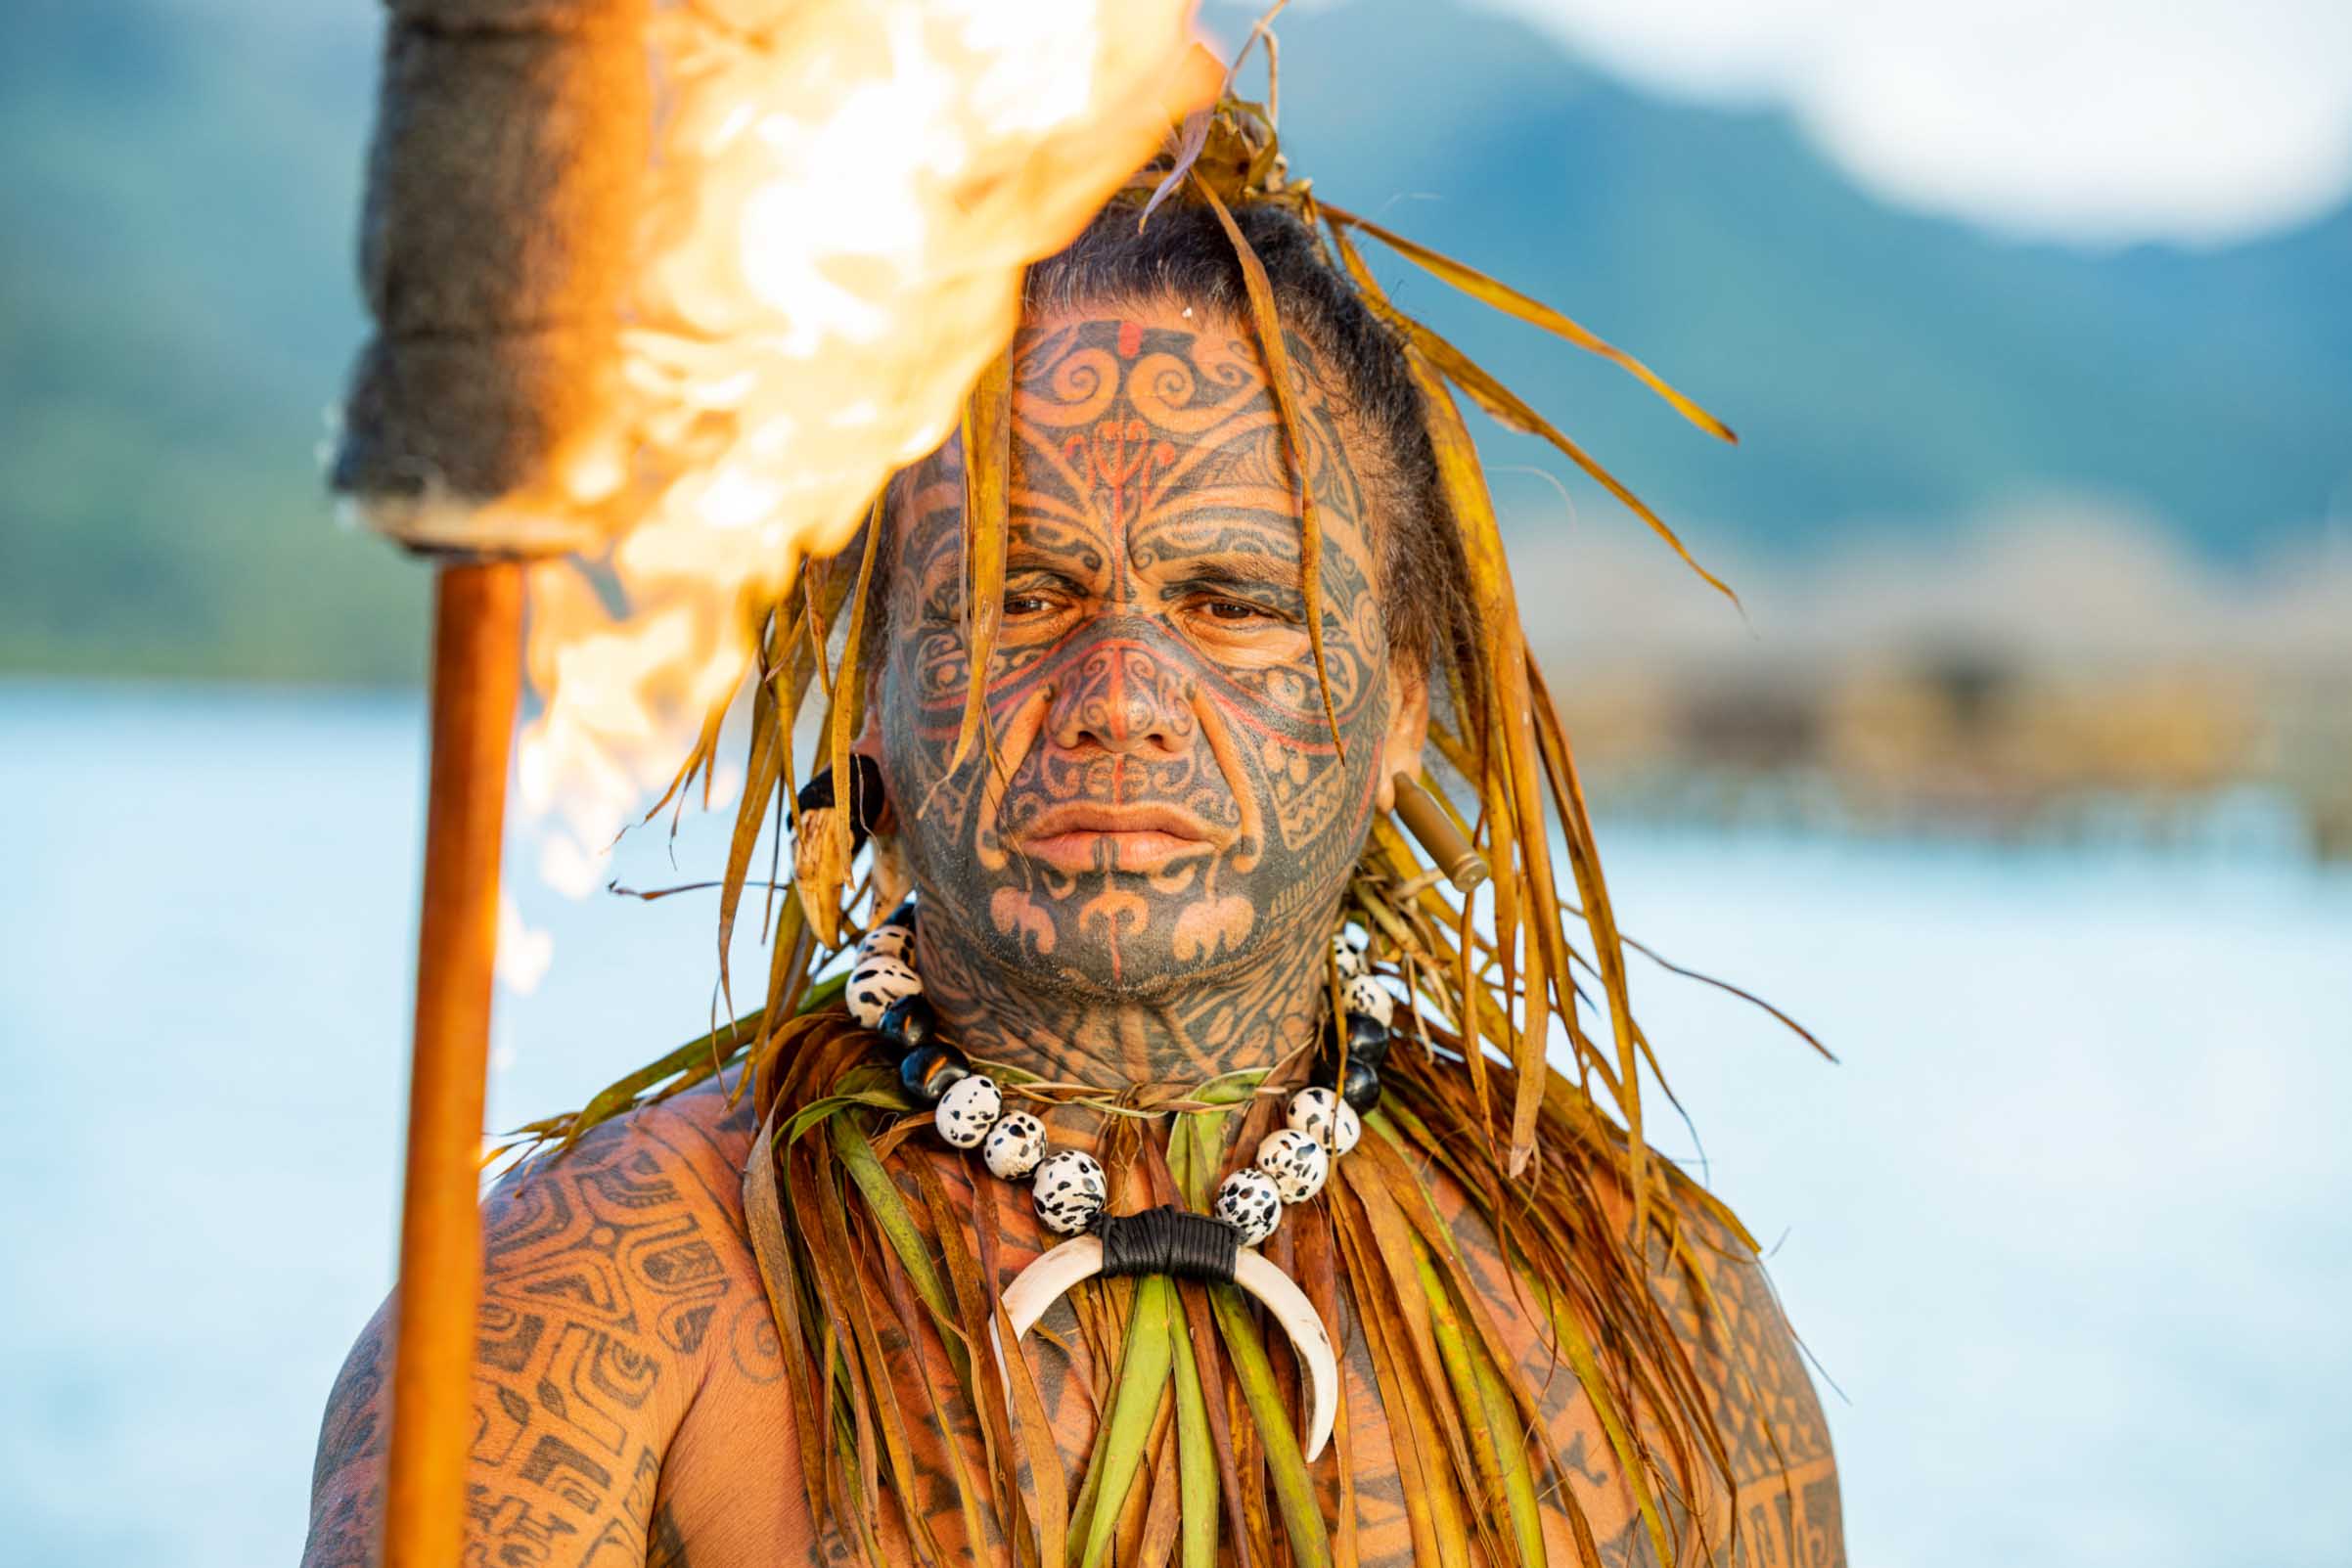 Man with tahitian tattos on his face